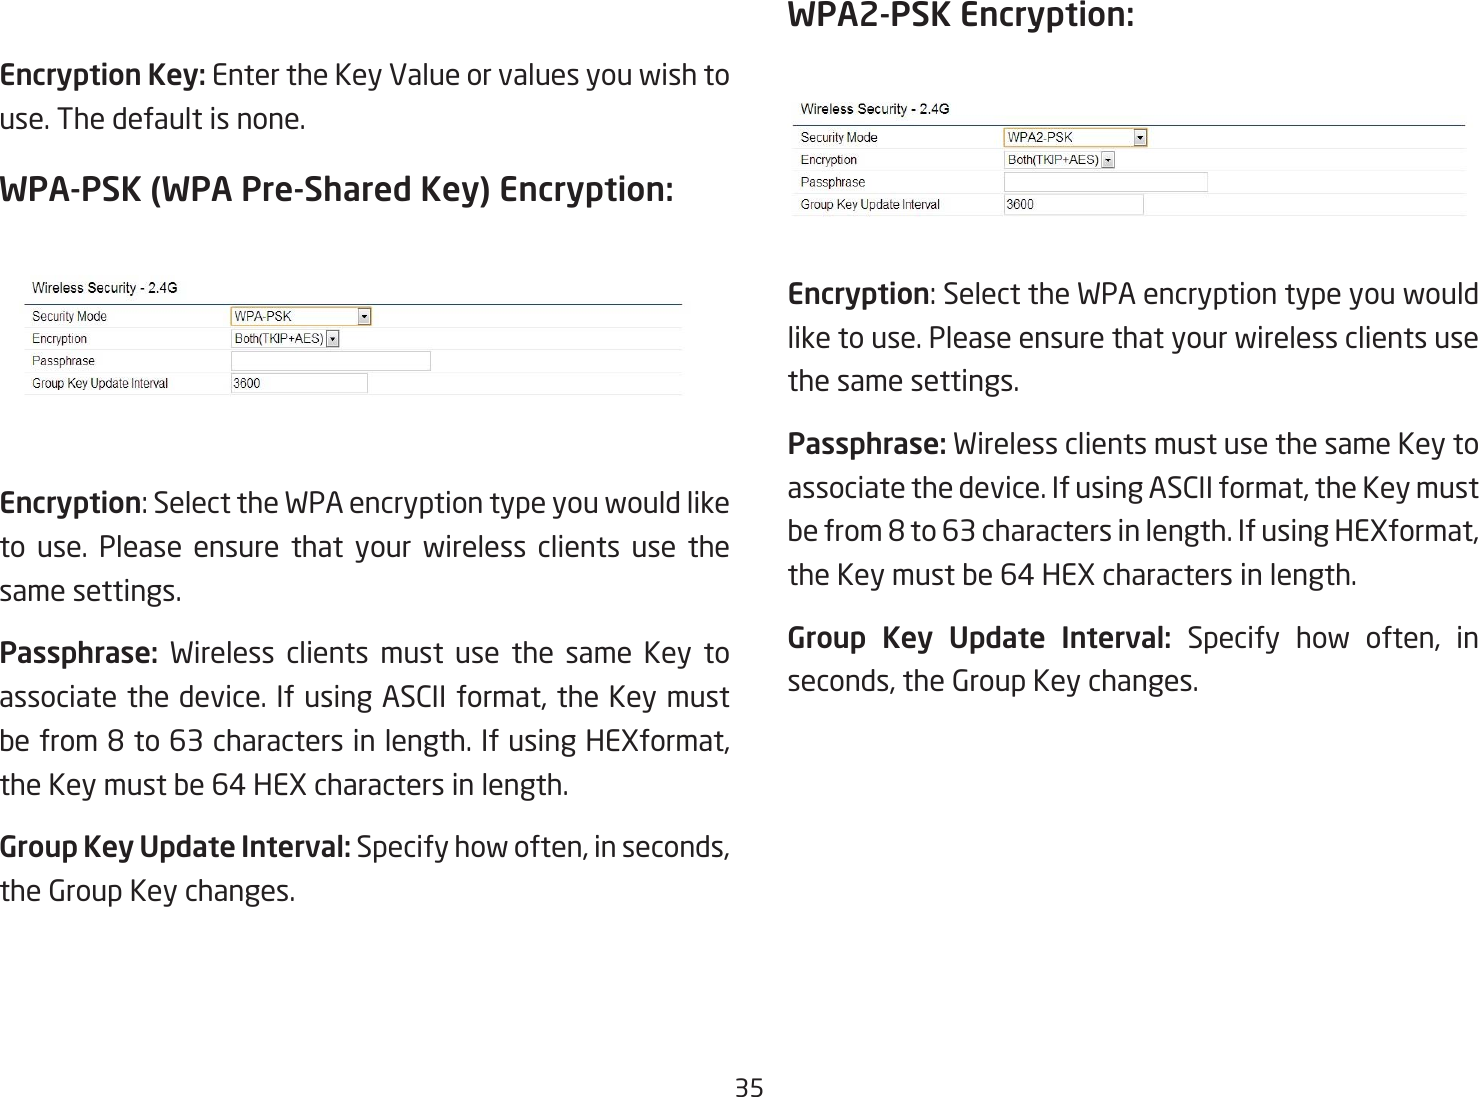 35Encryption Key: Enter the Key Value or values you wish to use. The default is none.WPA-PSK (WPA Pre-Shared Key) Encryption:Encryption:SelecttheWPAencryptiontypeyouwouldliketo use. Please ensure that your wireless clients use the same settings.Passphrase:  Wireless clients must use the same Key to associate the device. If using ASCII format, the Key must befrom8to63charactersinlength.IfusingHEXformat,the Key must be 64 HEX characters in length.Group Key Update Interval: Specify how often, in seconds, the Group Key changes. WPA2-PSK Encryption: Encryption:SelecttheWPAencryptiontypeyouwouldlike to use. Please ensure that your wireless clients use the same settings.Passphrase: Wireless clients must use the same Key to associate the device. If using ASCII format, the Key must befrom8to63charactersinlength.IfusingHEXformat,the Key must be 64 HEX characters in length.Group  Key  Update  Interval:  Specify how often, in seconds, the Group Key changes.